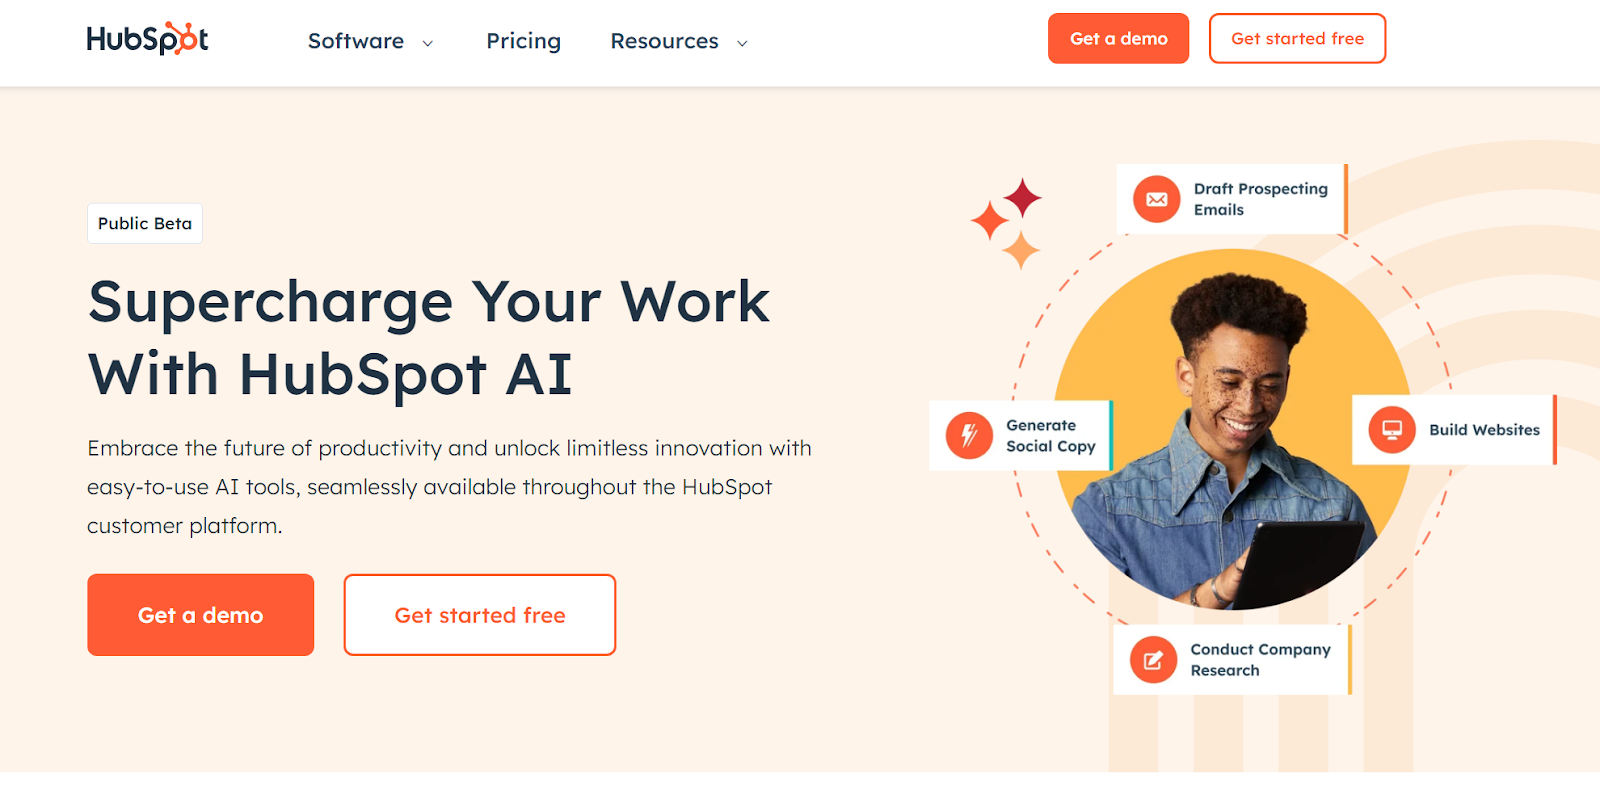 The HubSpot AI landing page urges you to "Supercharge Your Work" and includes CTAs to get a demo or get started for free.